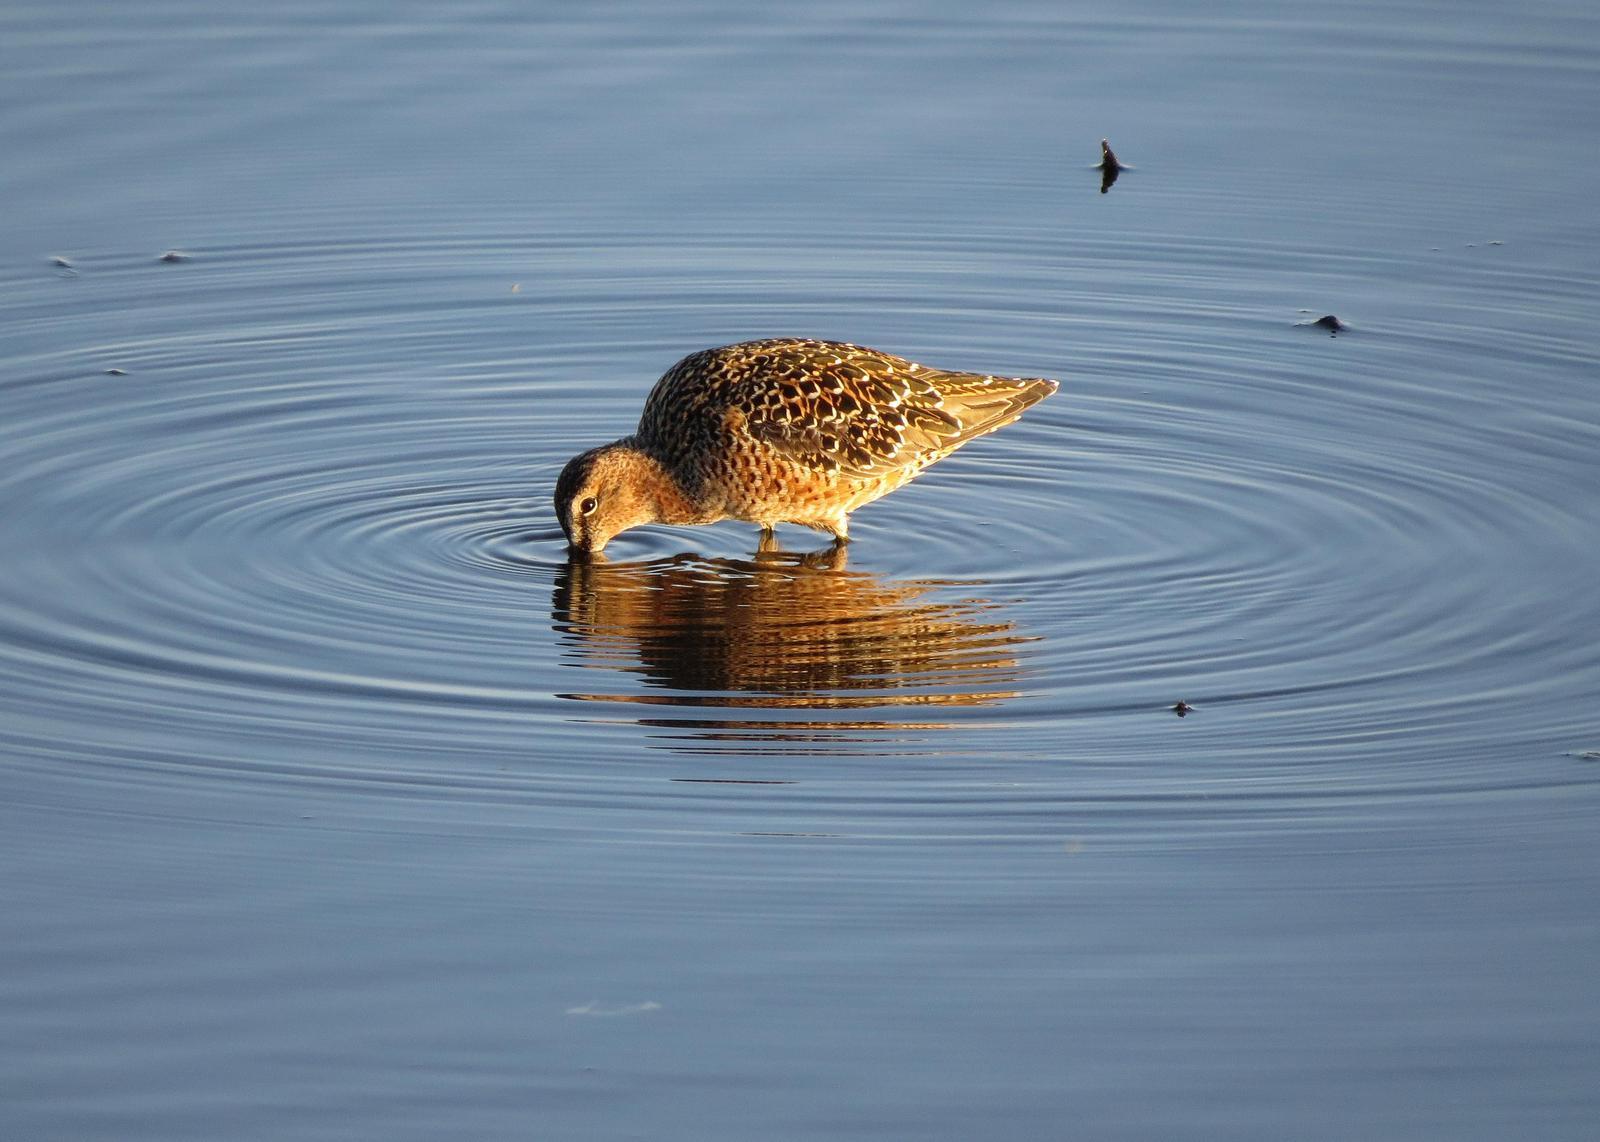 Long-billed Dowitcher Photo by Kelly Preheim